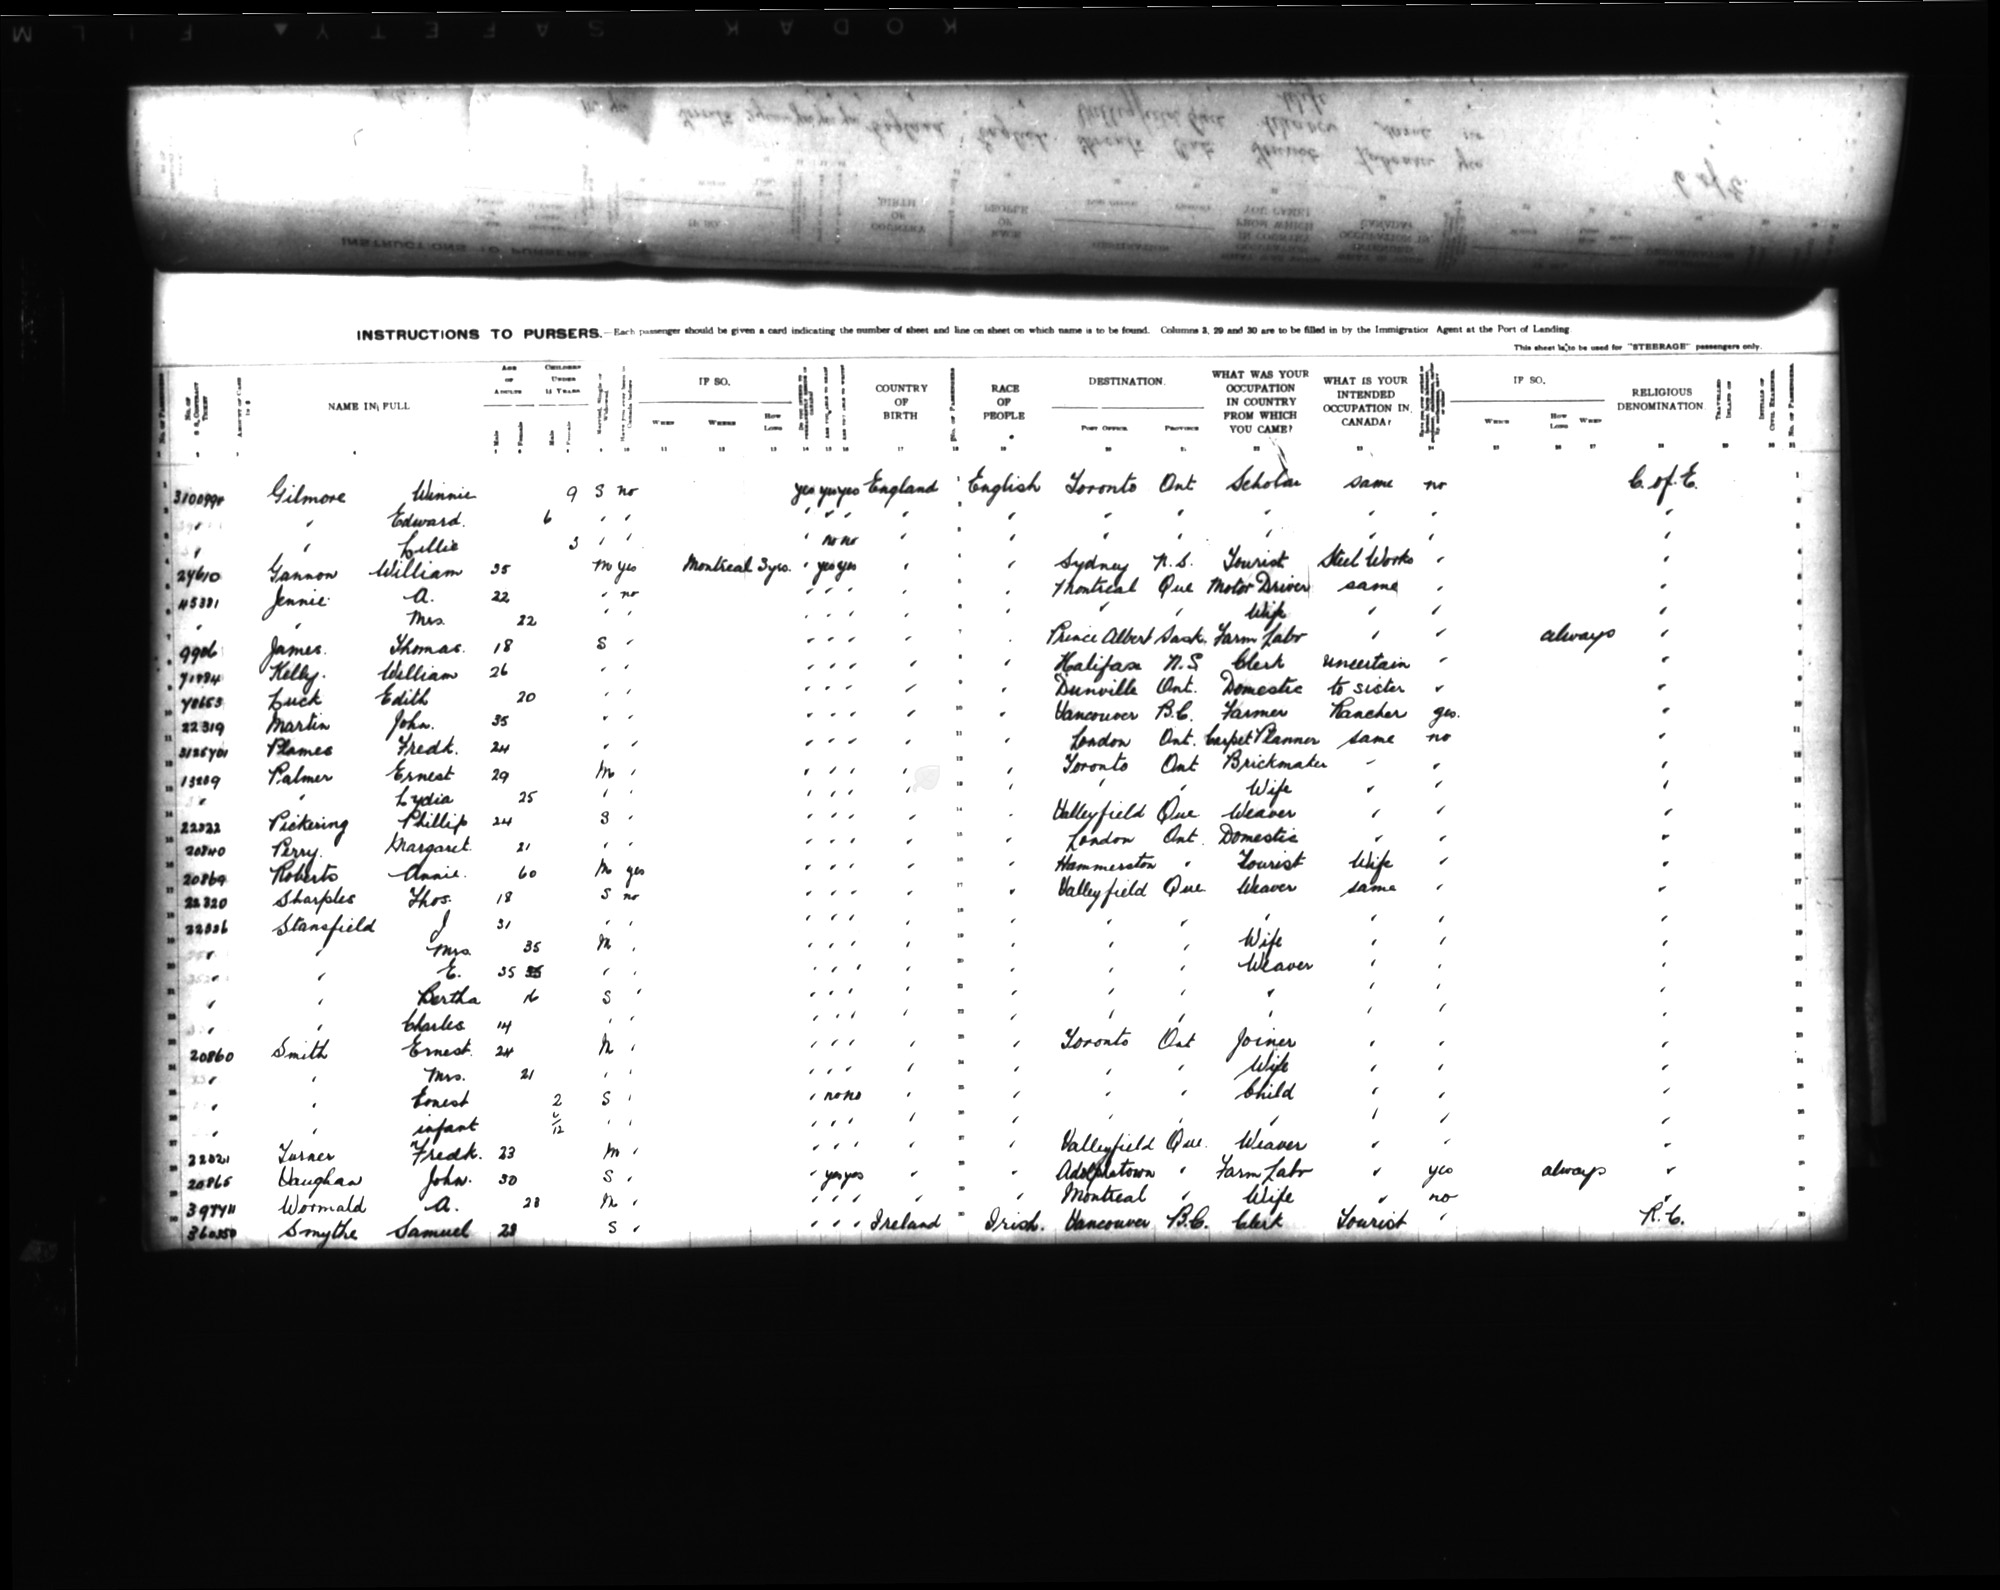 Digitized page of Passenger Lists for Image No.: CANIMM1913PLIST_0000406960-00586